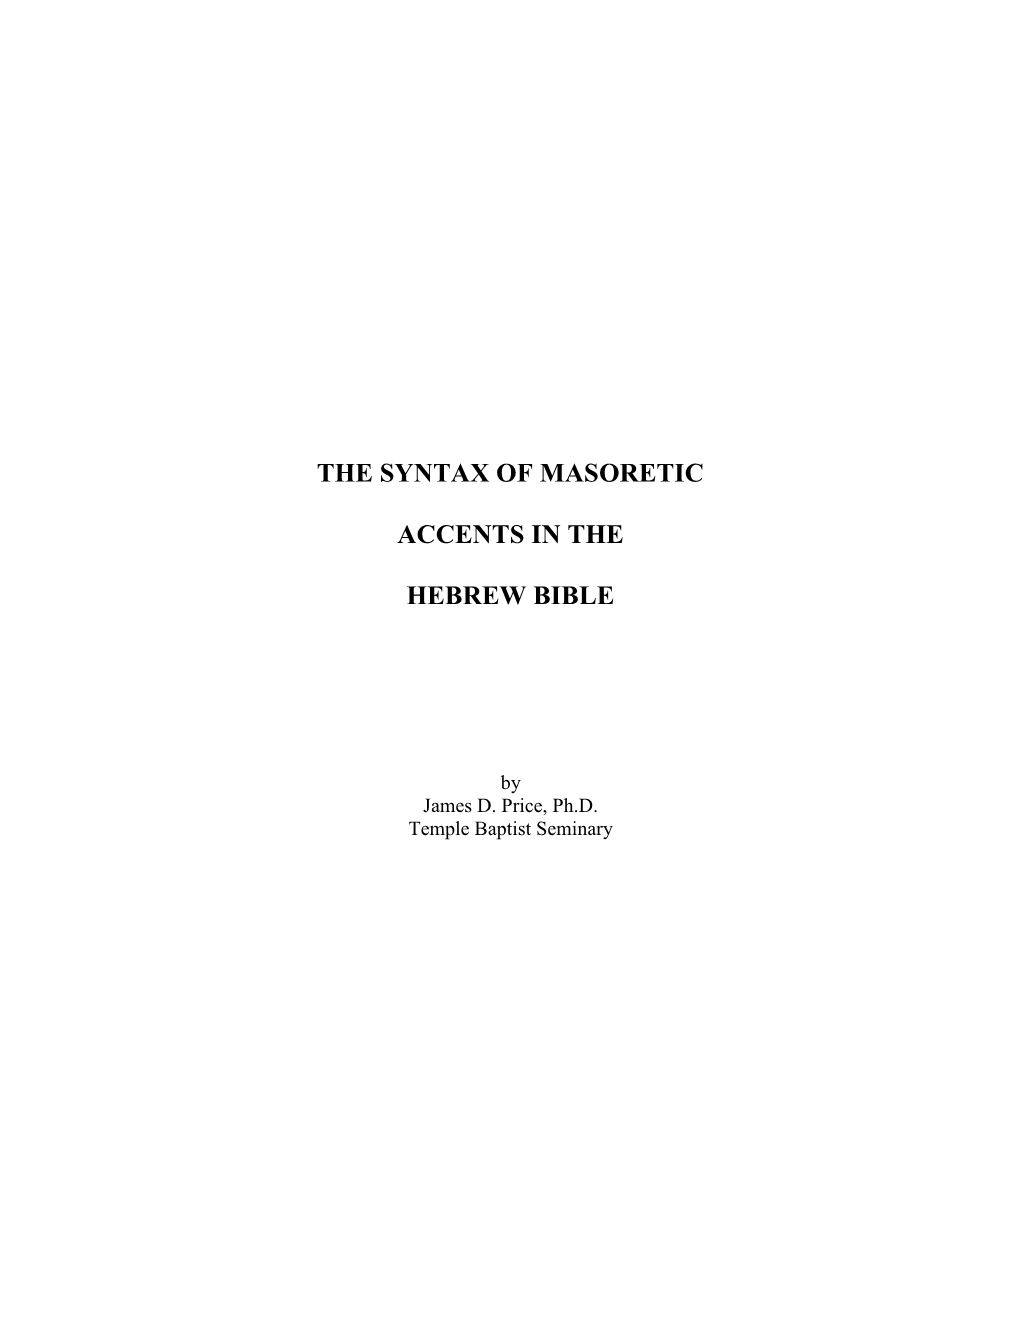 The Syntax of Masoretic Accents in the Hebrew Bible